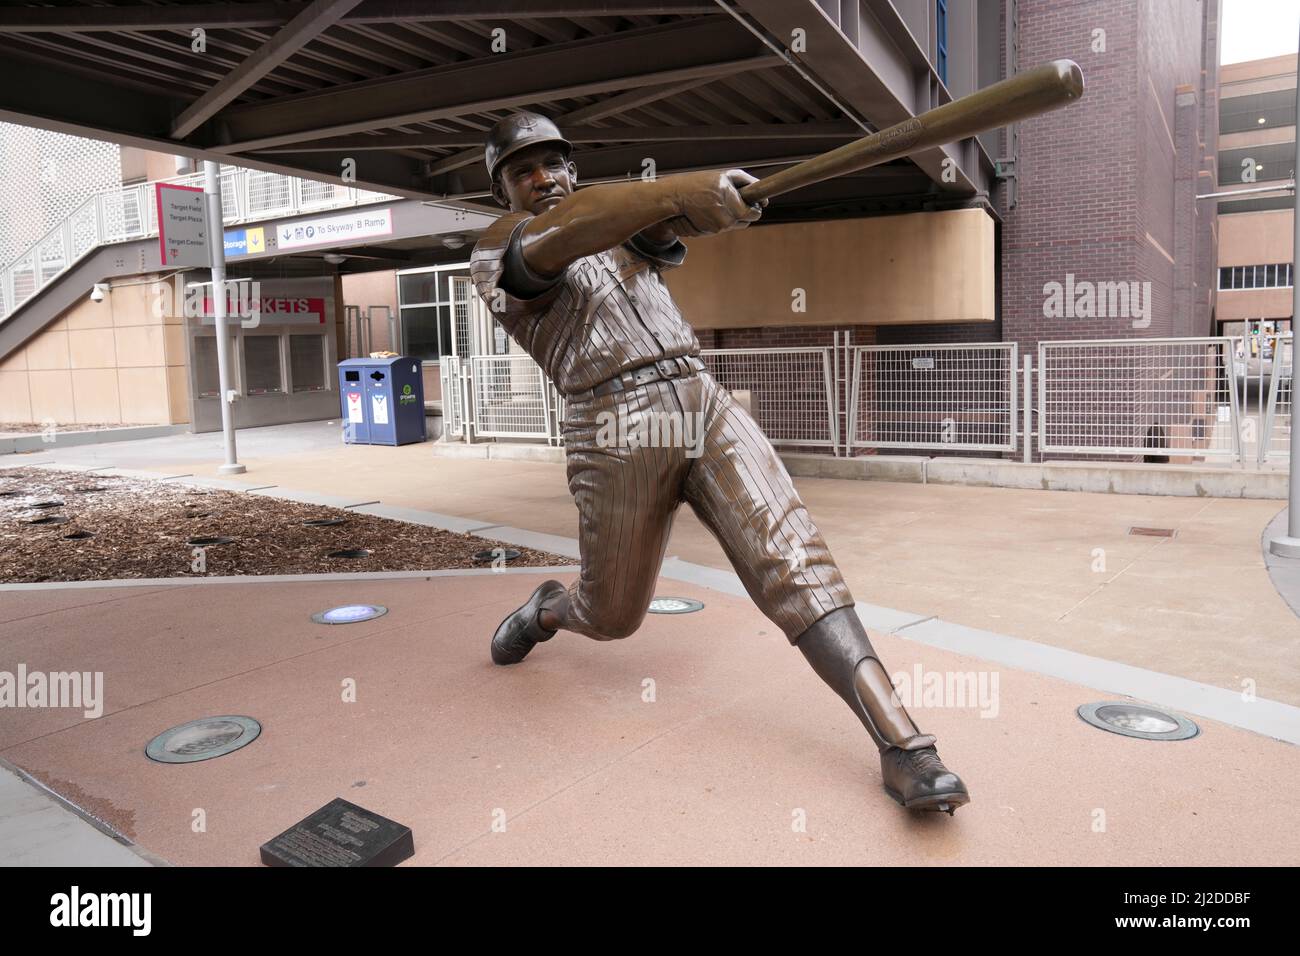 A statue of former Minnesota Twins player Harmon Killebrew at Target Field Thursday, Mar. 31, 2022, in Minneapolis. Stock Photo